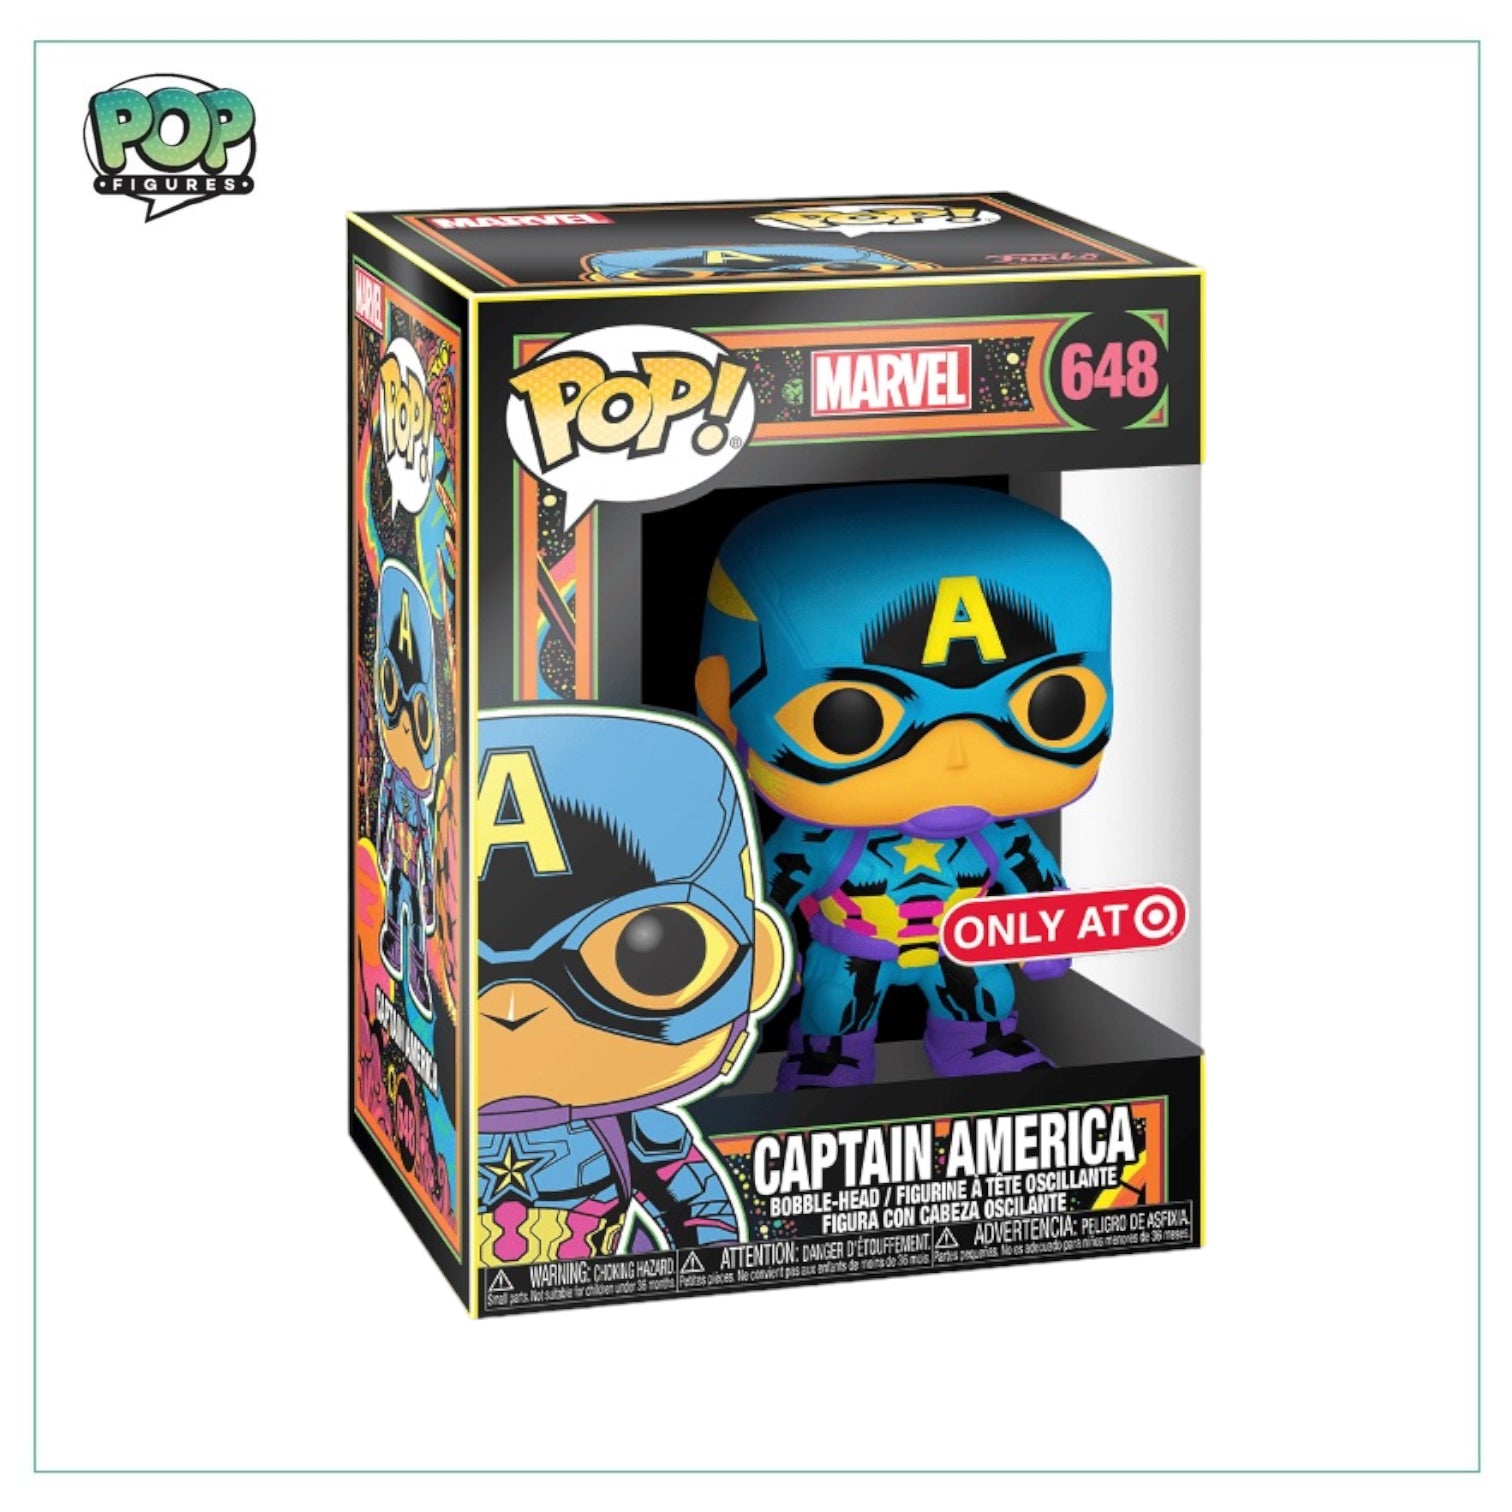 Captain America (Blacklight) #648 Funko Pop! - Marvel - Only at Target - Angry Cat